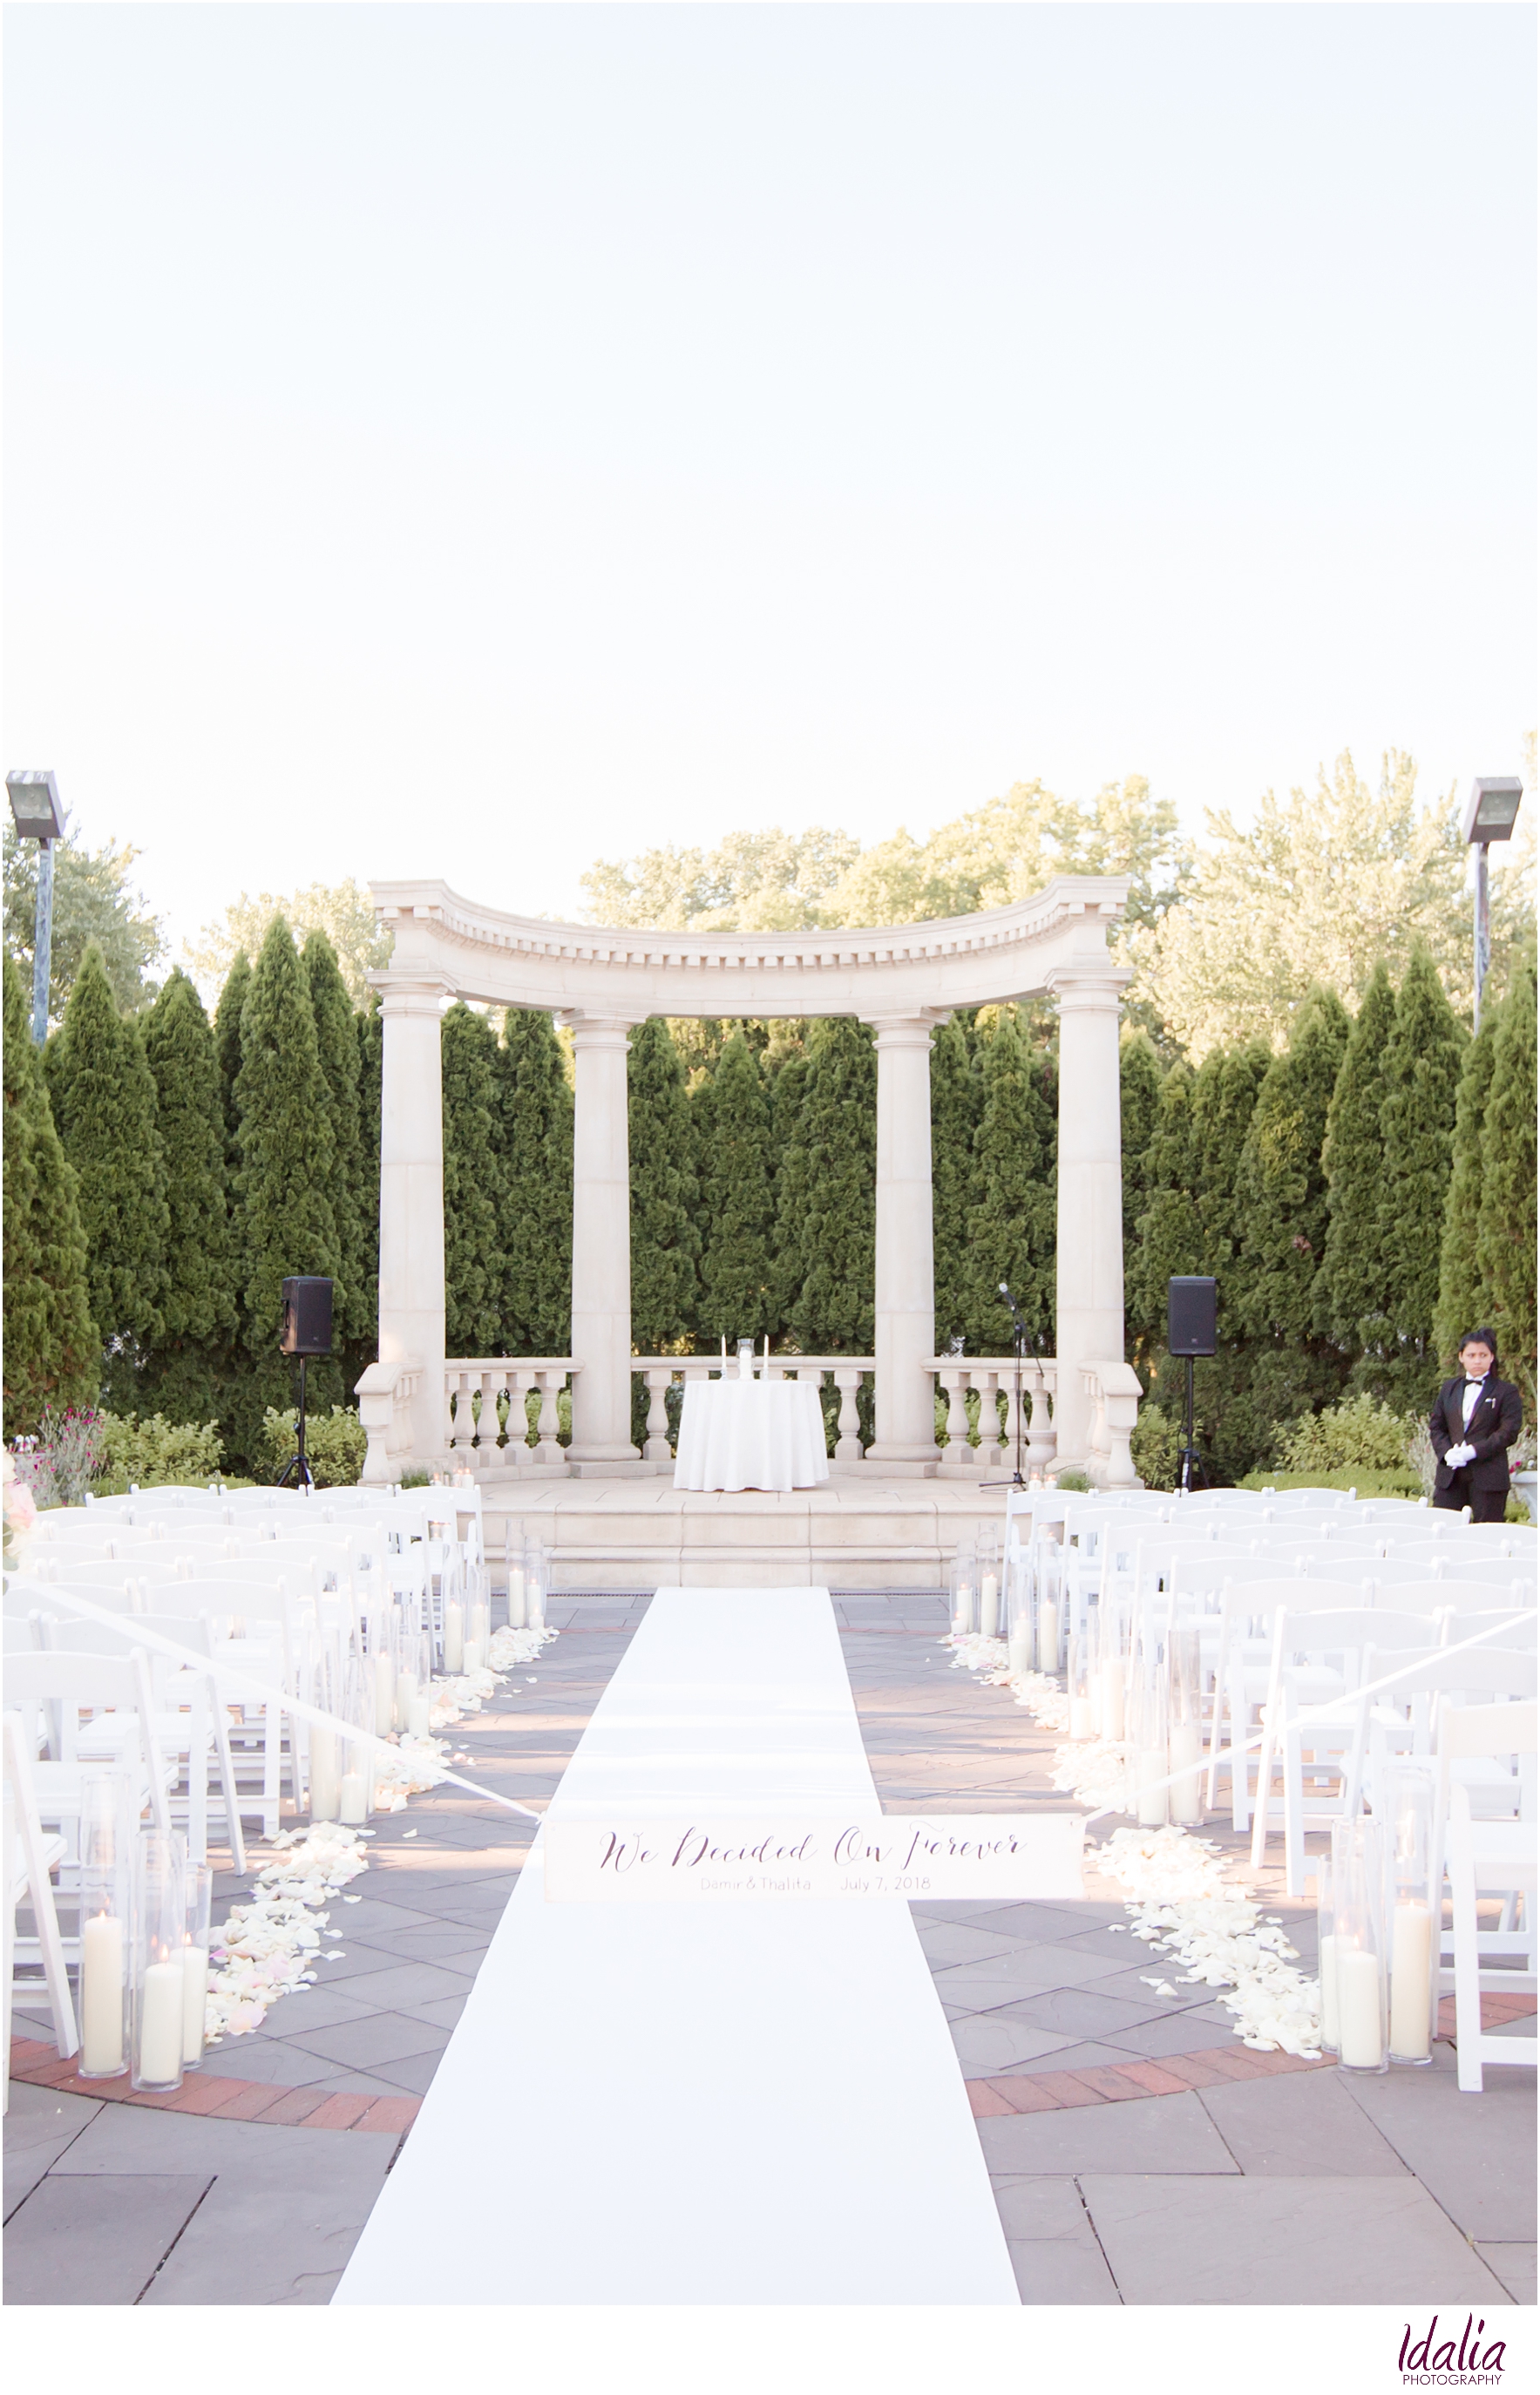 Click to learn more about outdoor ceremonies at The Rockleigh | #njweddingvenue #therockleigh